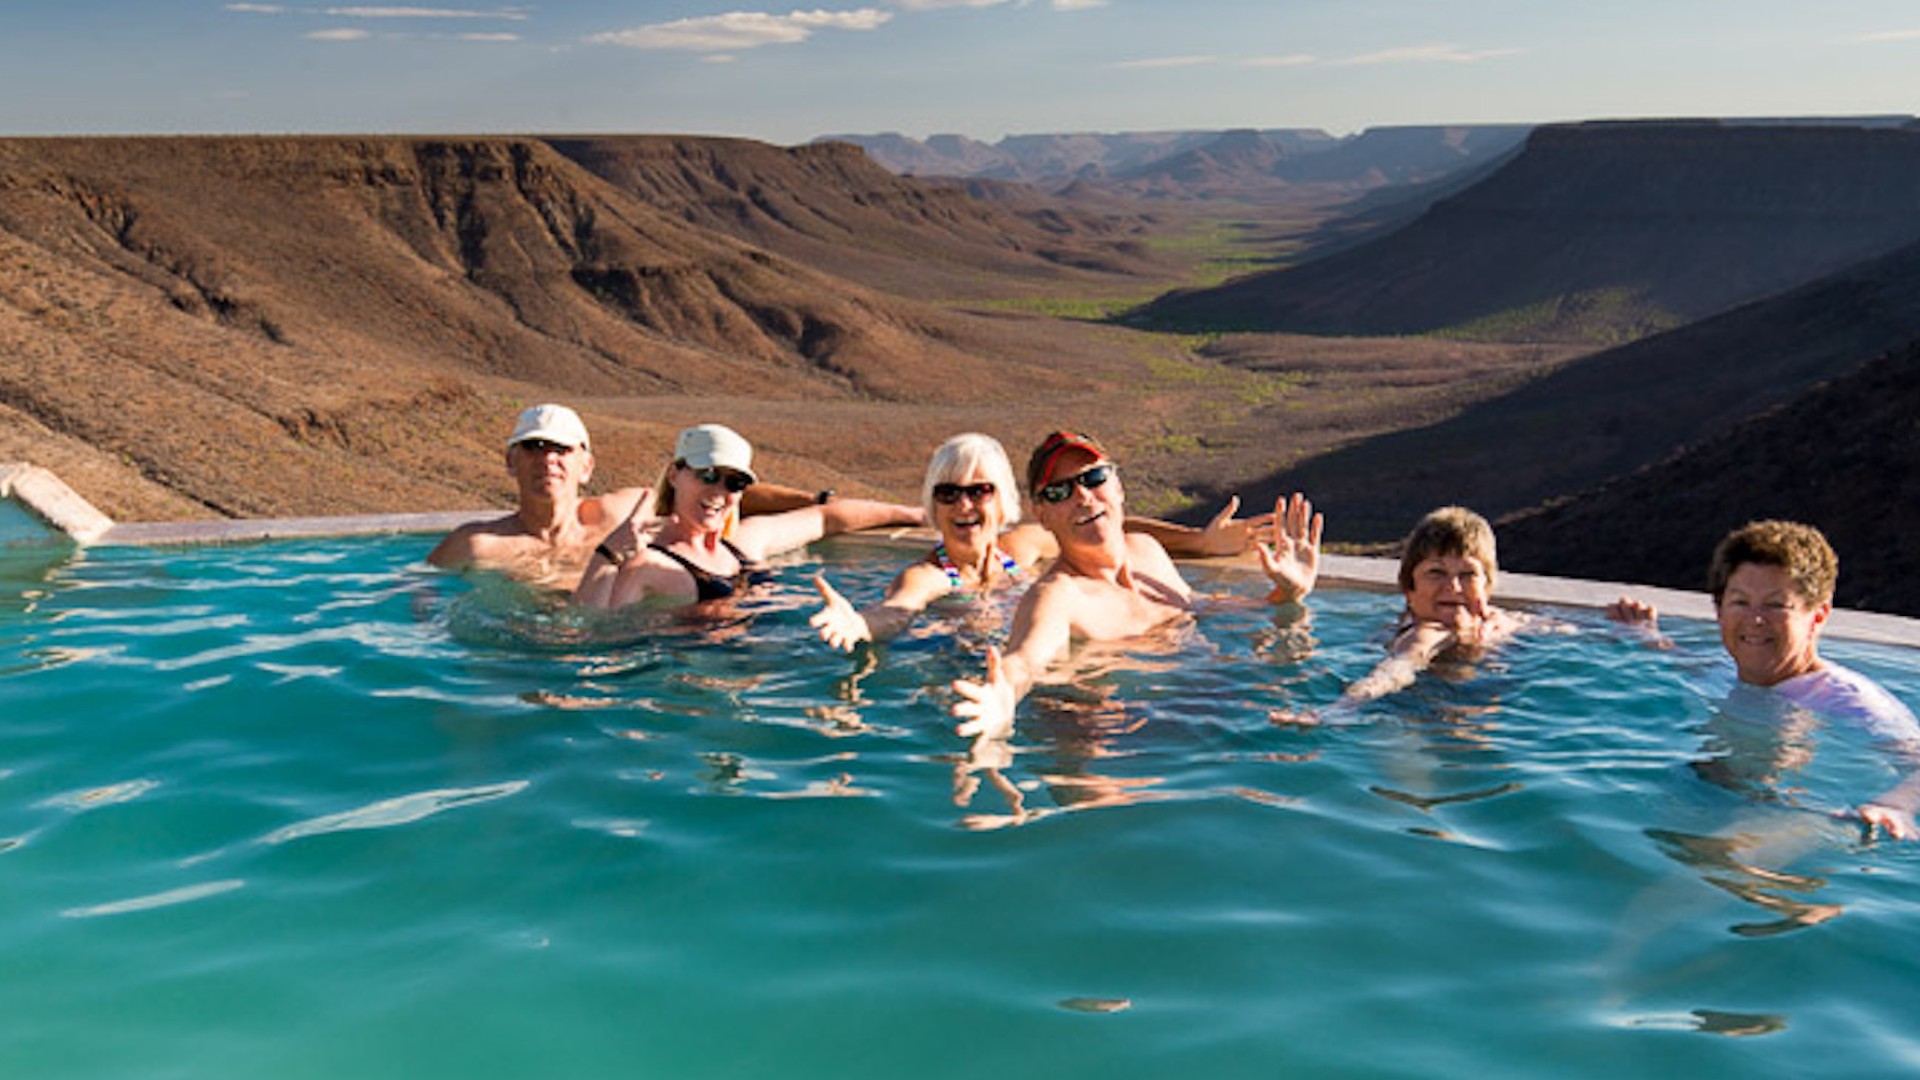 People smiling in a pool overlooking a vast valley in Namibia